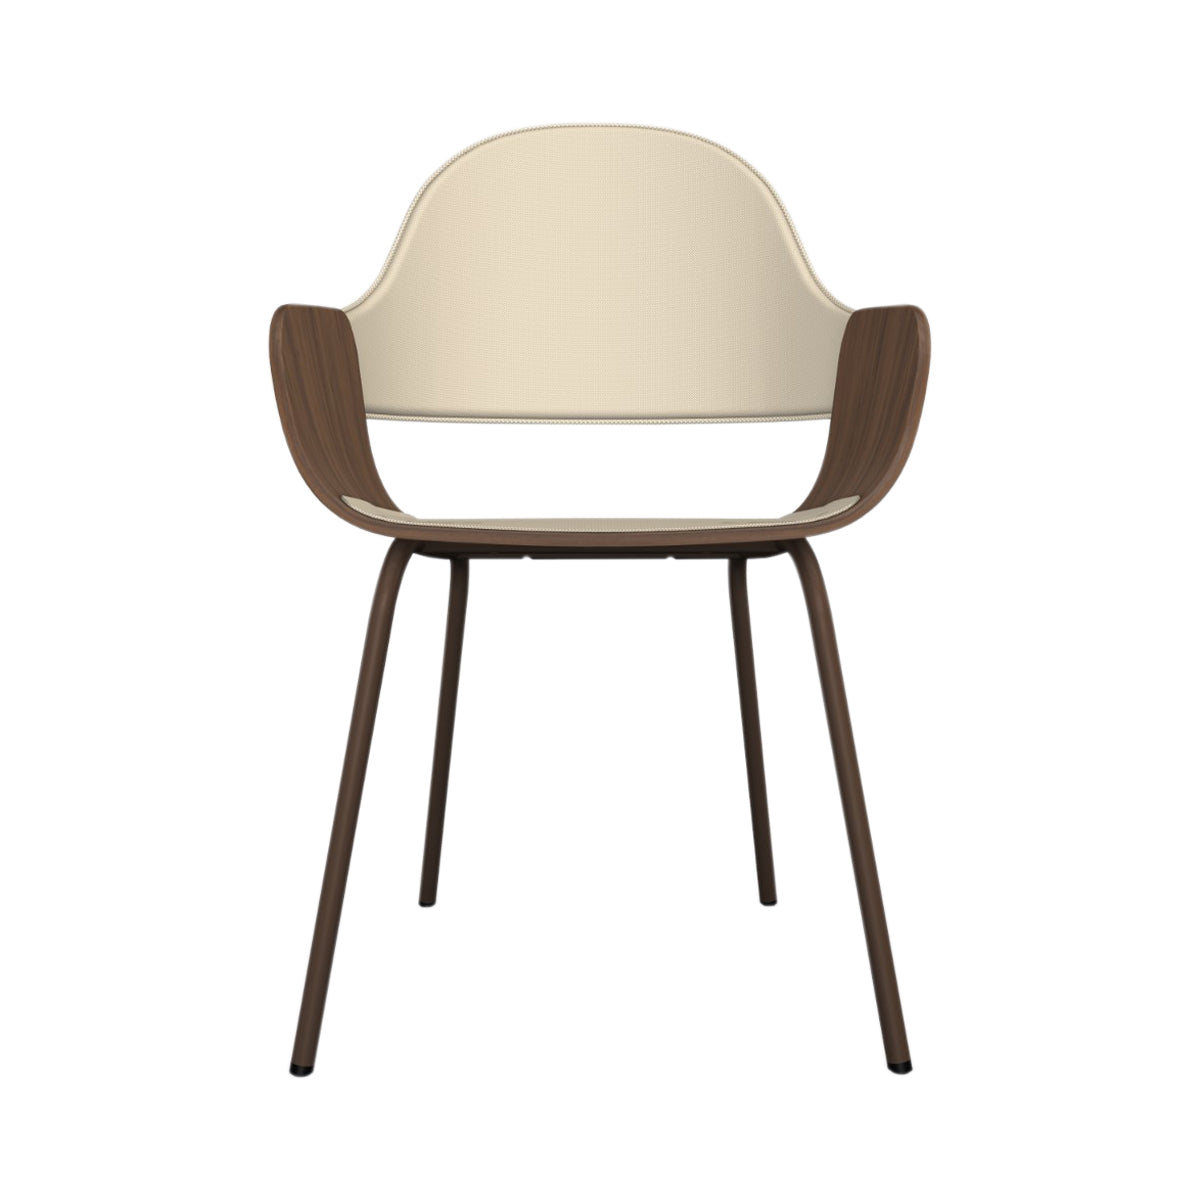 Showtime Nude Chair with Metal Base: Seat + Backrest Upholstered + Walnut + Pale Brown